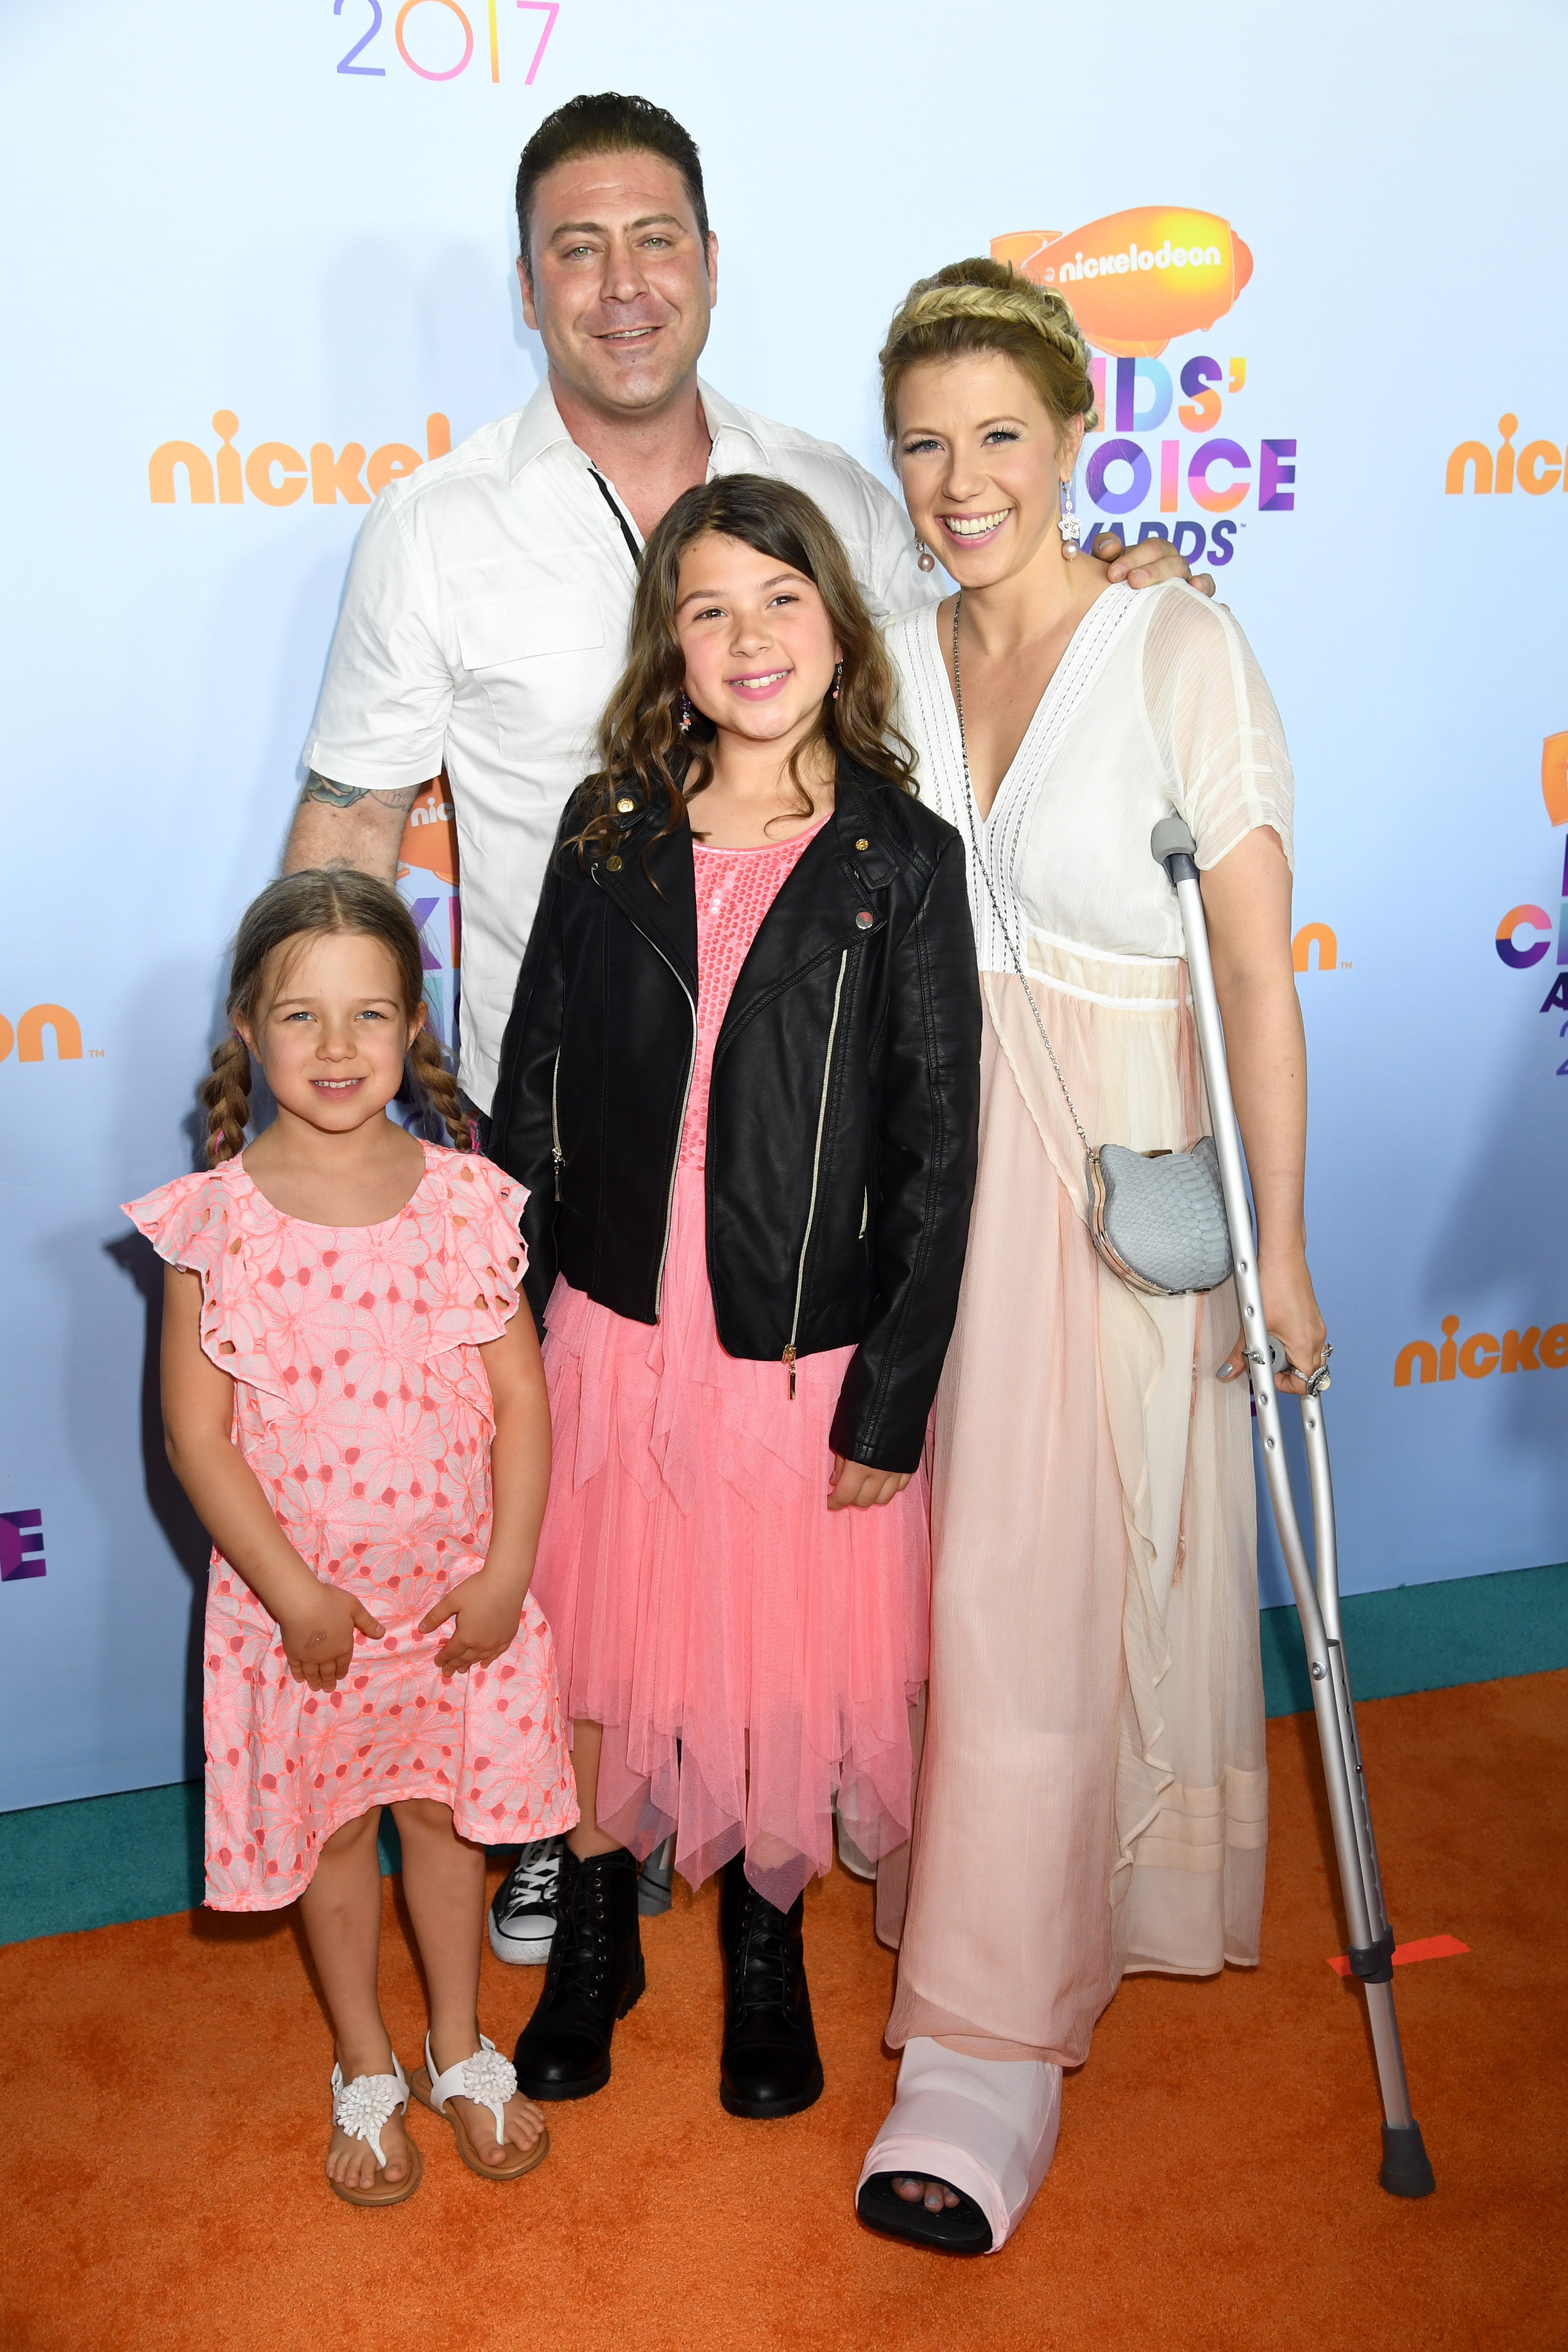 Jodie Sweetin, Justin Hodak and daughters Beatrix Carlin Sweetin Coyle and Zoie Laurel May Herpin at Nickelodeon's 2017 Kids' Choice Awards at USC Galen Center on March 11, 2017 in Los Angeles, California.┃Source: Getty Images